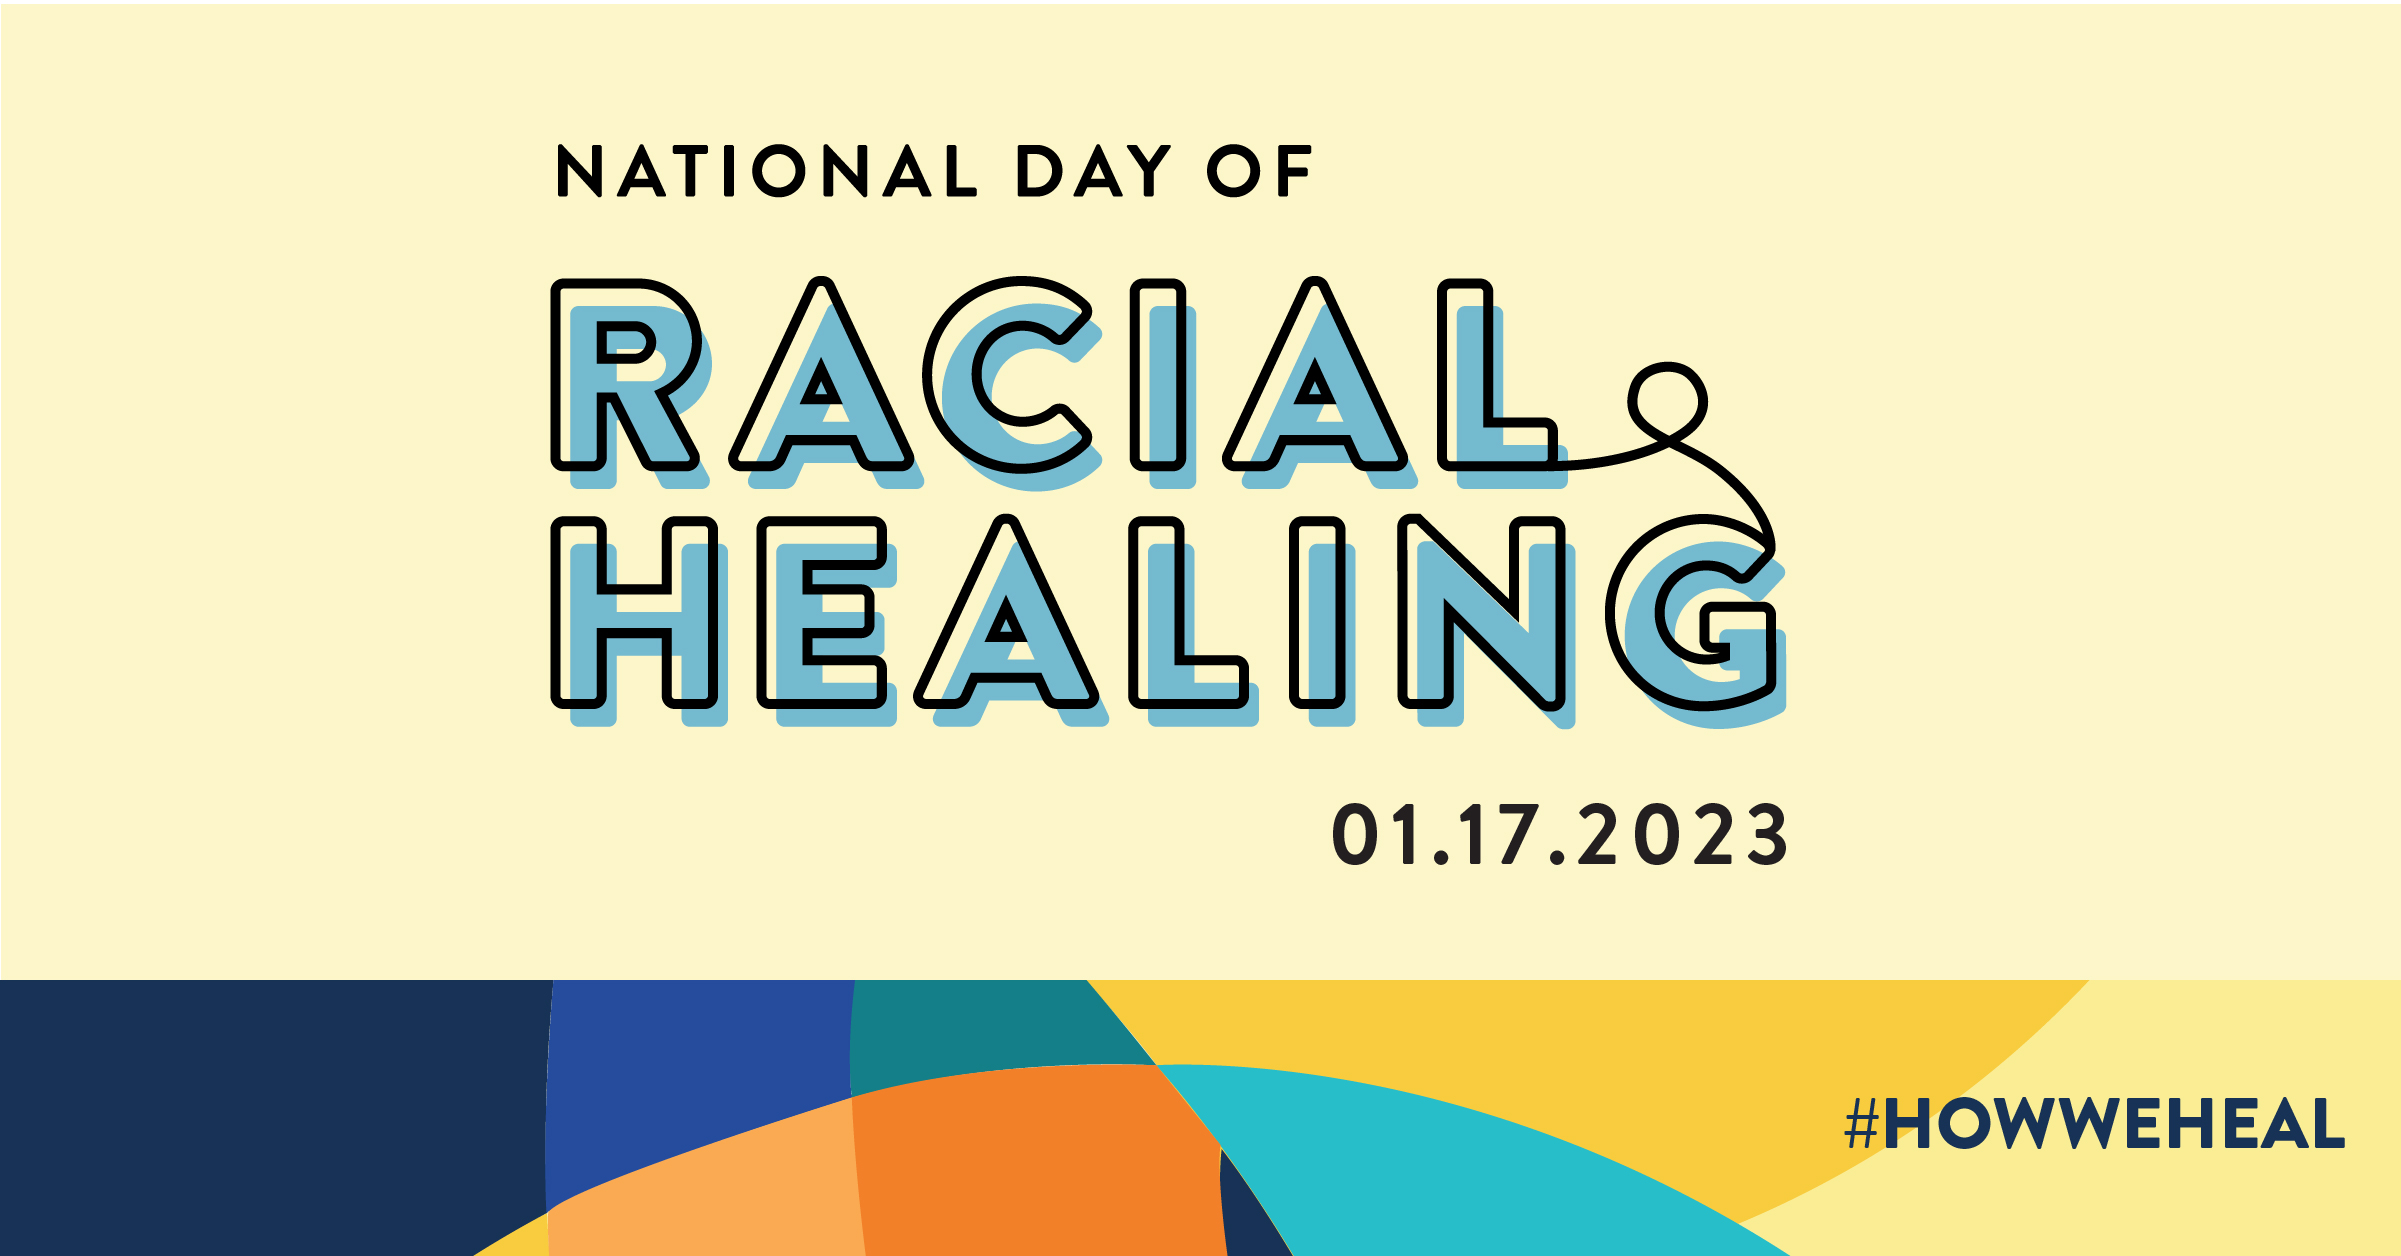 The National Day of Racial Healing is Jan. 17, 2023.